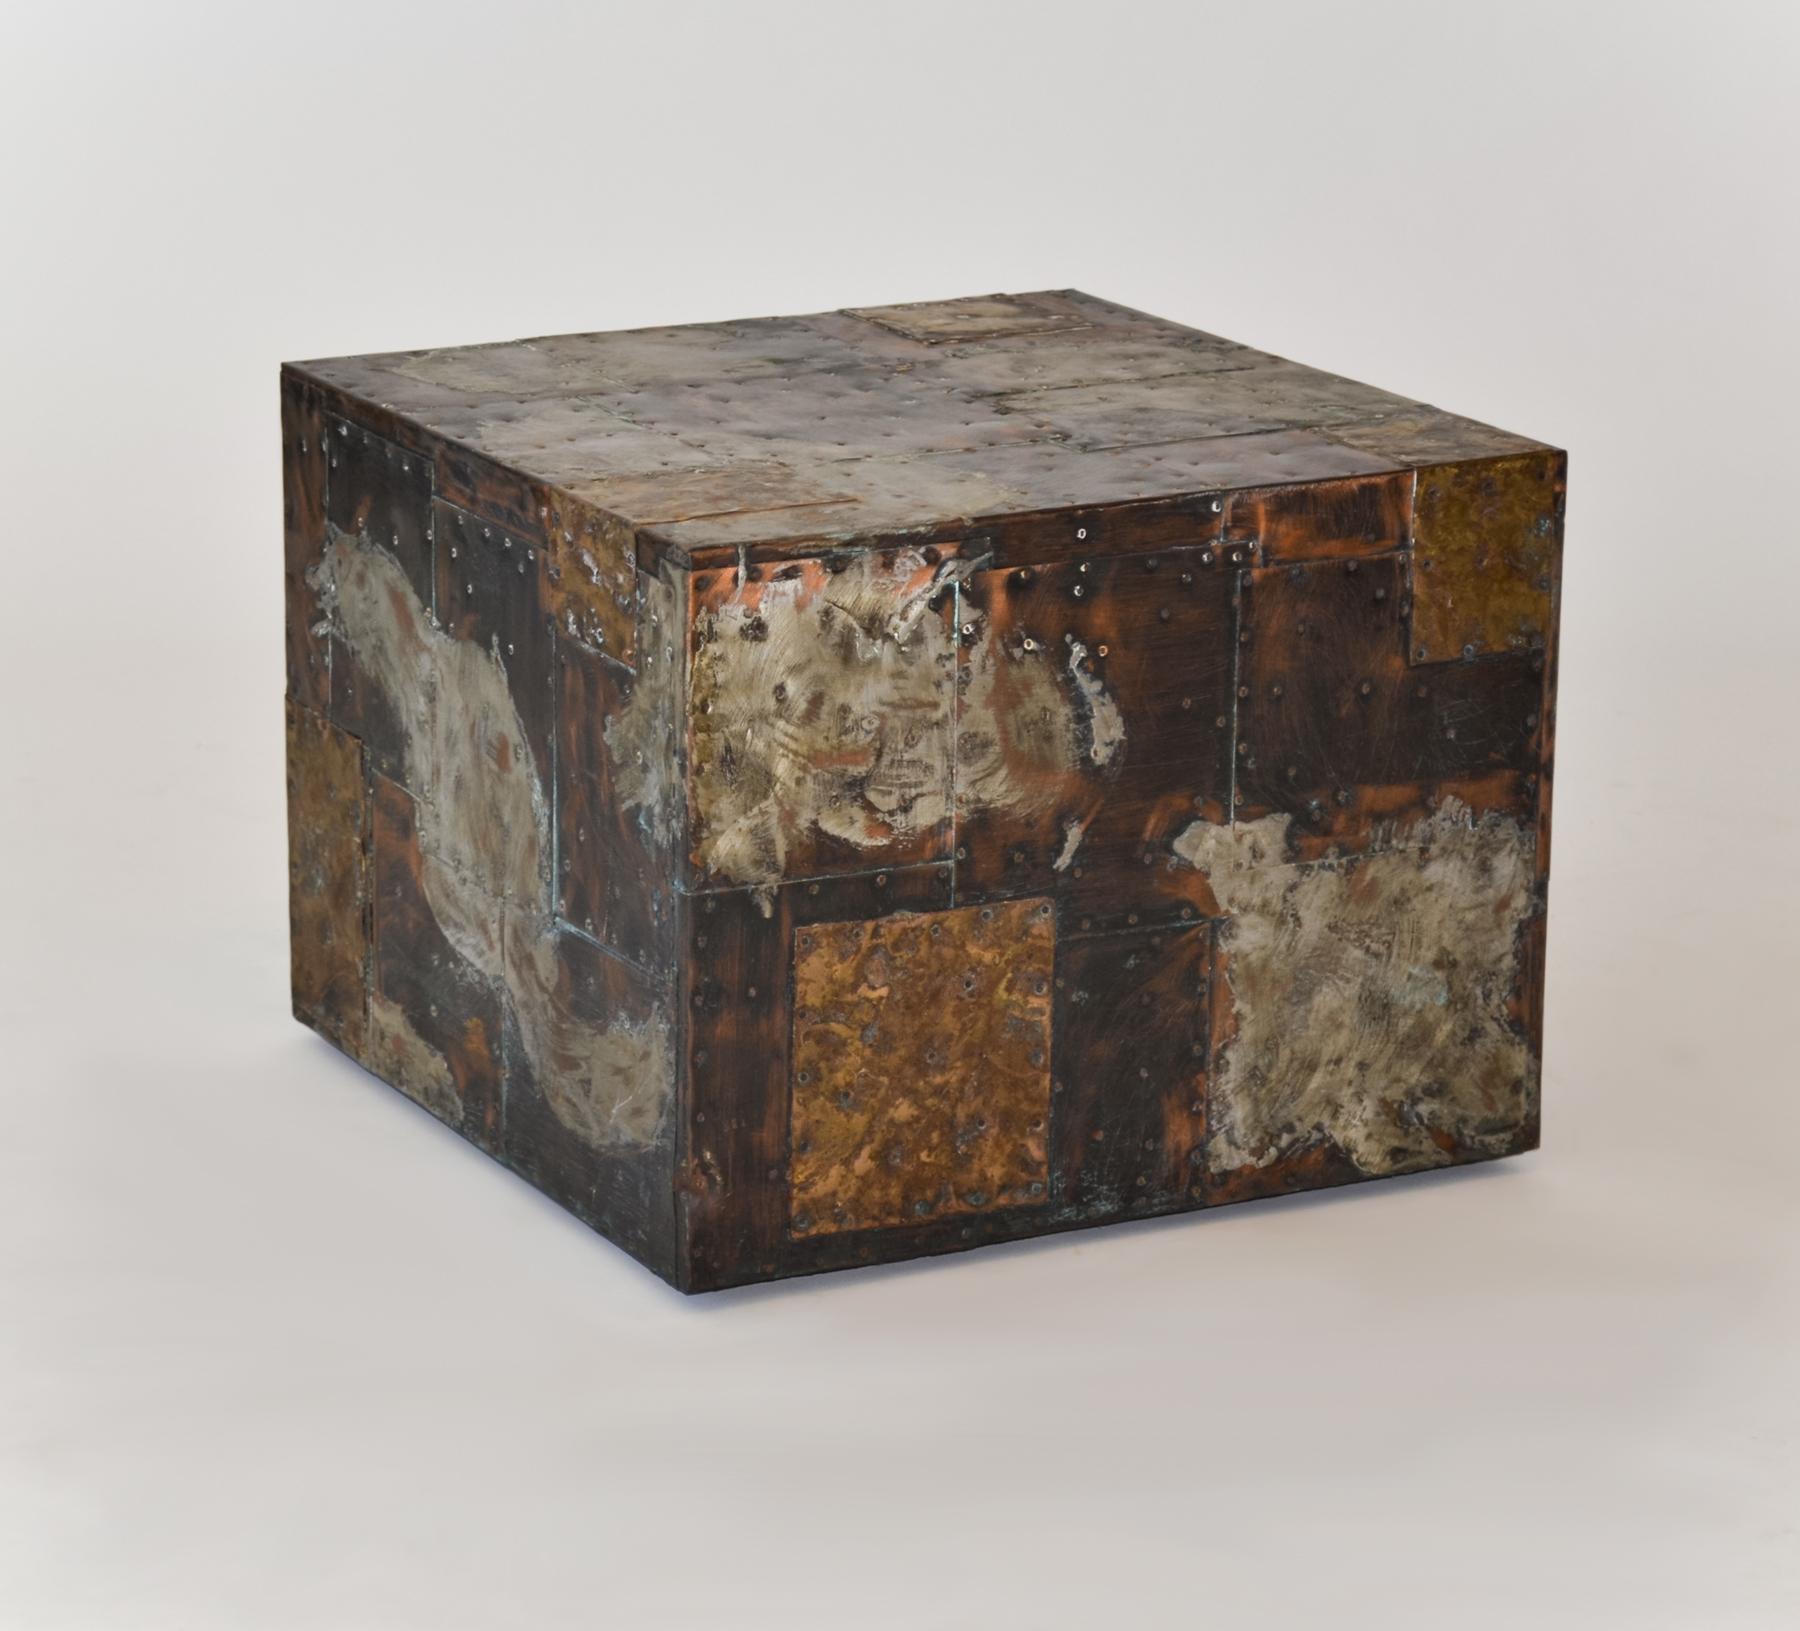 Paul Evans For Directional Metal Patchwork Cube Side Table 1967
Steel, copper and brass patchwork metal cube table by Paul Evans. Seldom seen without a slate inset. 
The table features Evans signature nailed, hand-distressed and tooled copper sheets